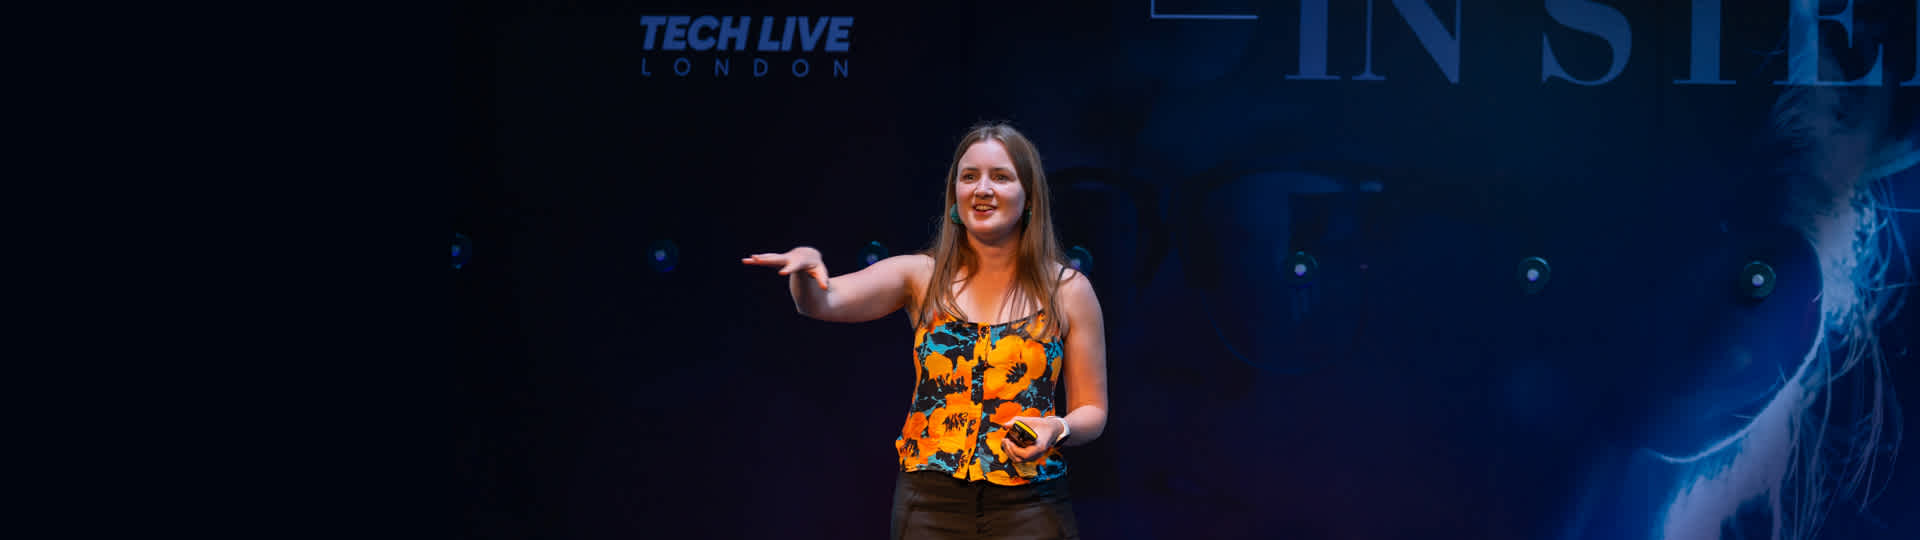 a woman in a poppy printed top standing on a stage. a sign in the background reads Tech Live London